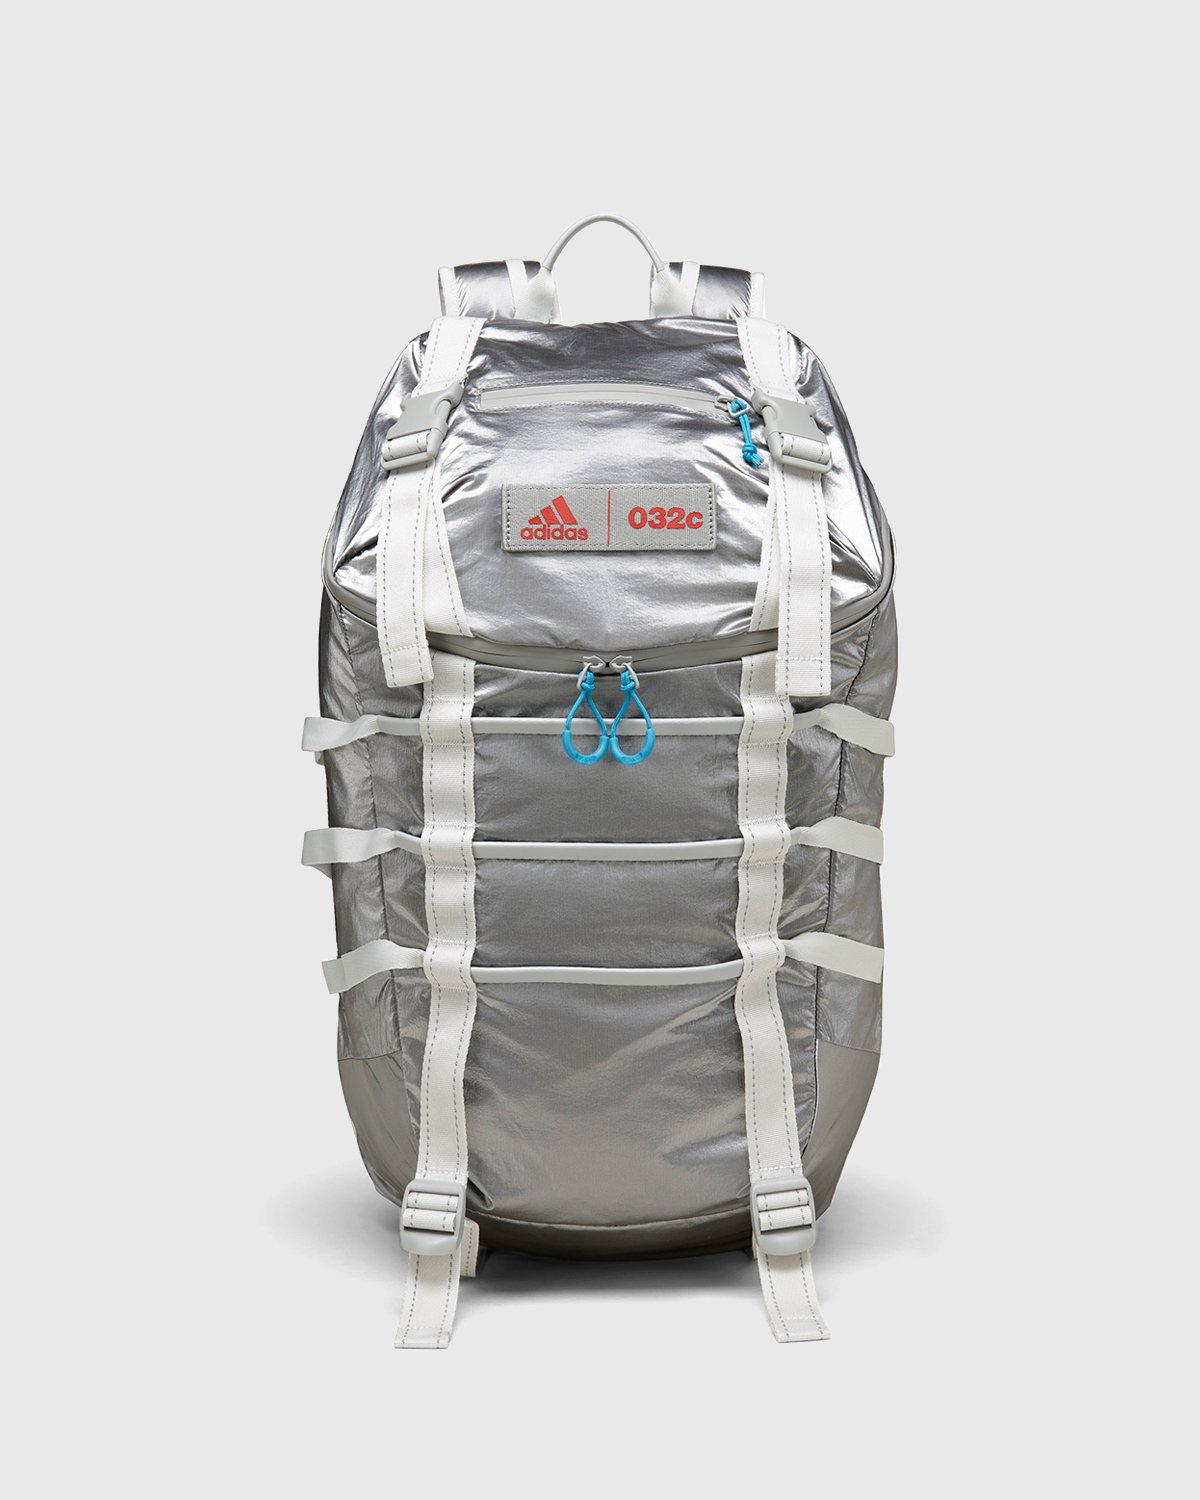 Adidas x 032c - Backpack Greone - Accessories - White - Image 1